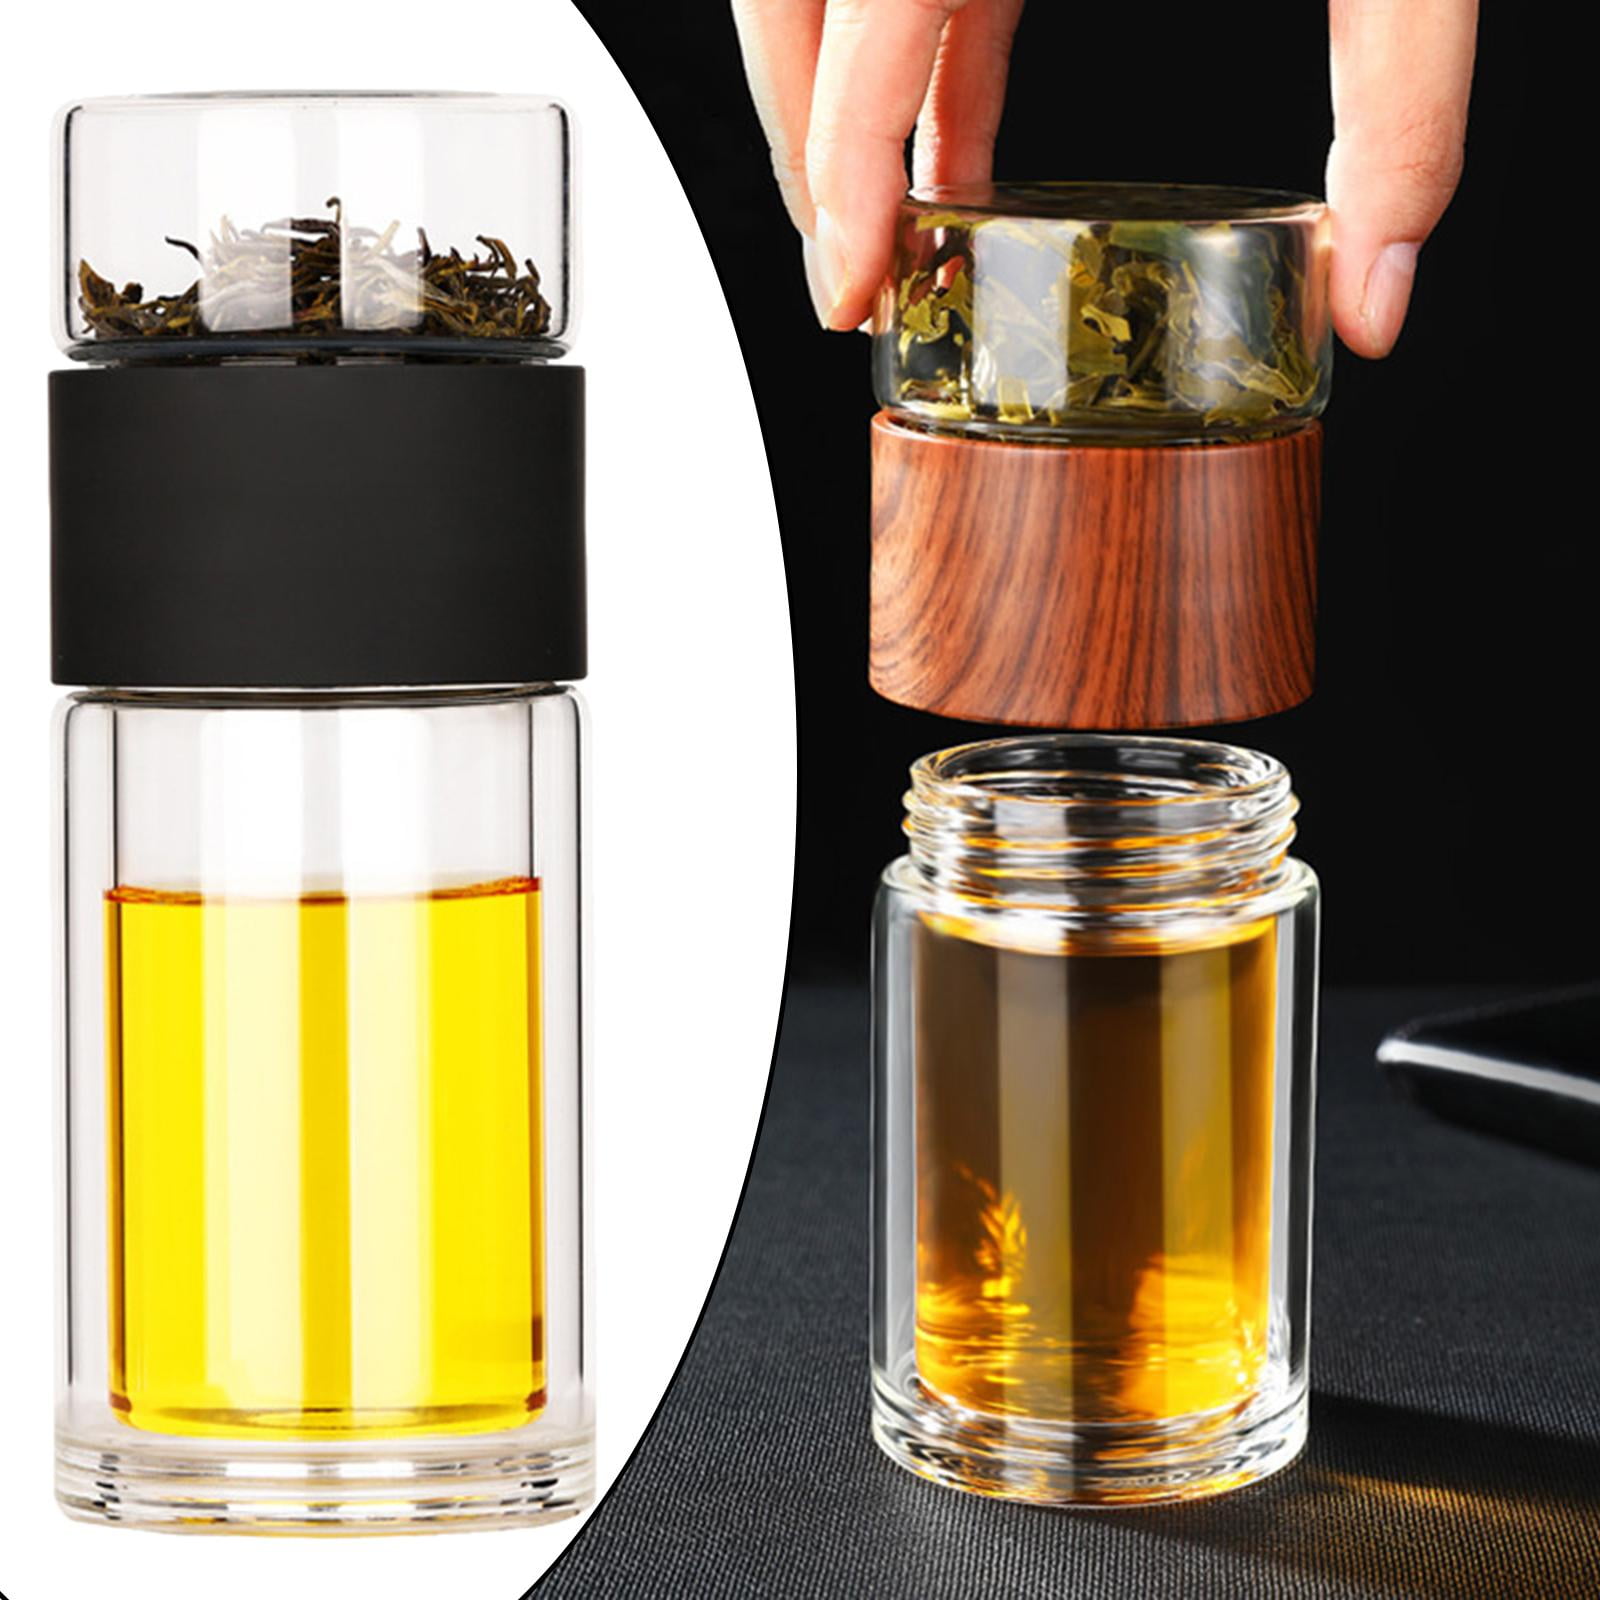  Pure Zen Tea Tumbler with Infuser - Double Wall Glass Travel Tea  Mug with Stainless Steel Filter - Leakproof Tea Infuser Bottle with  Strainer for Loose Leaf Tea and Fruit Water